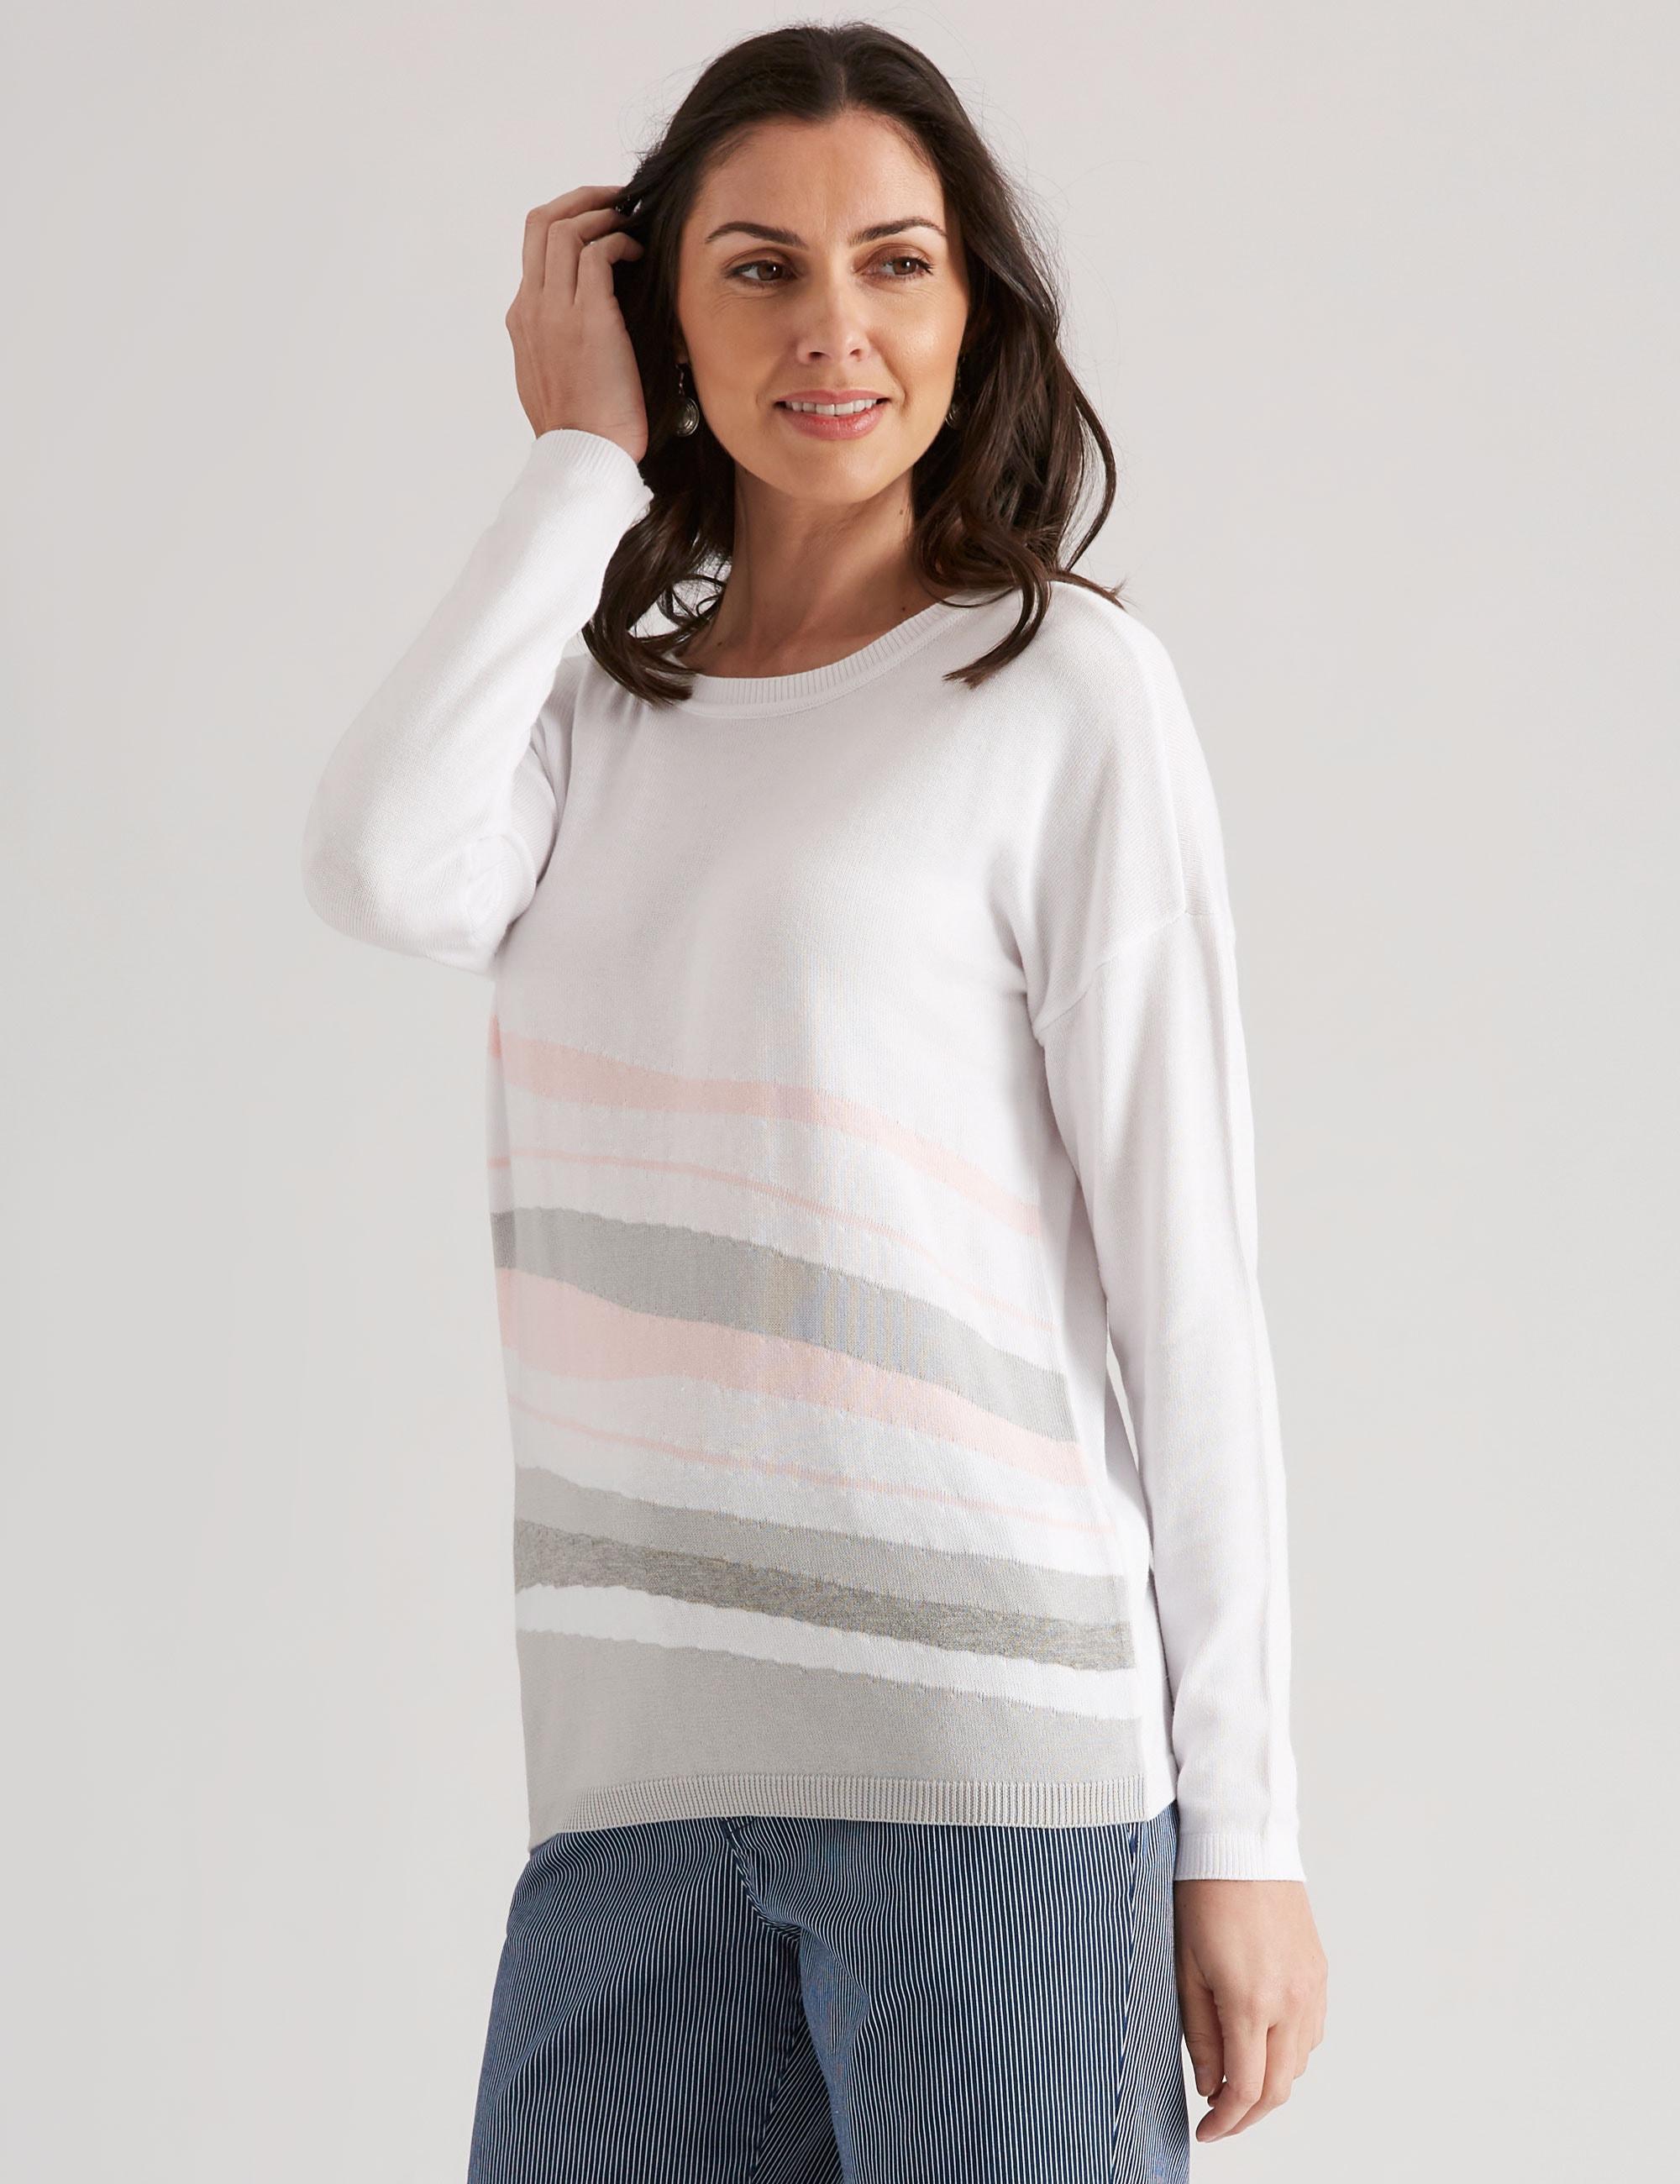 W LANE - Womens Jumper - Regular Winter Sweater - Pink Pullover - Cotton Clothes - Long Sleeve - Cream / Pink Striped - Fitted Crew Neck Batwing Wavy